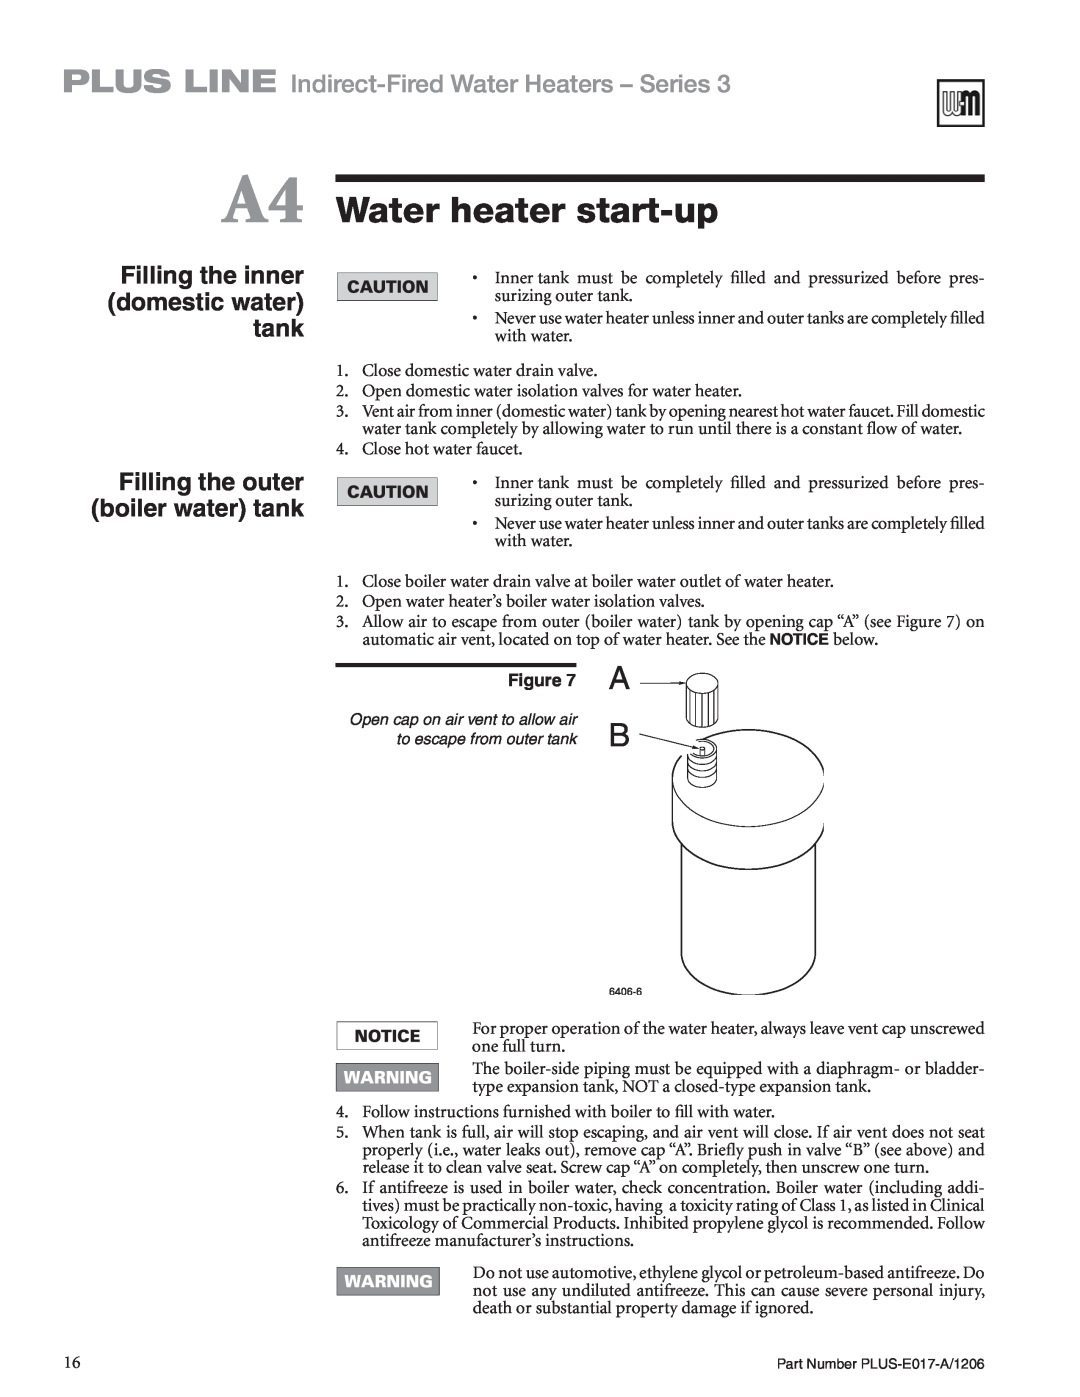 Weil-McLain PLUS-E017-A/1206 manual A4 Water heater start-up, Filling the inner domestic water tank 